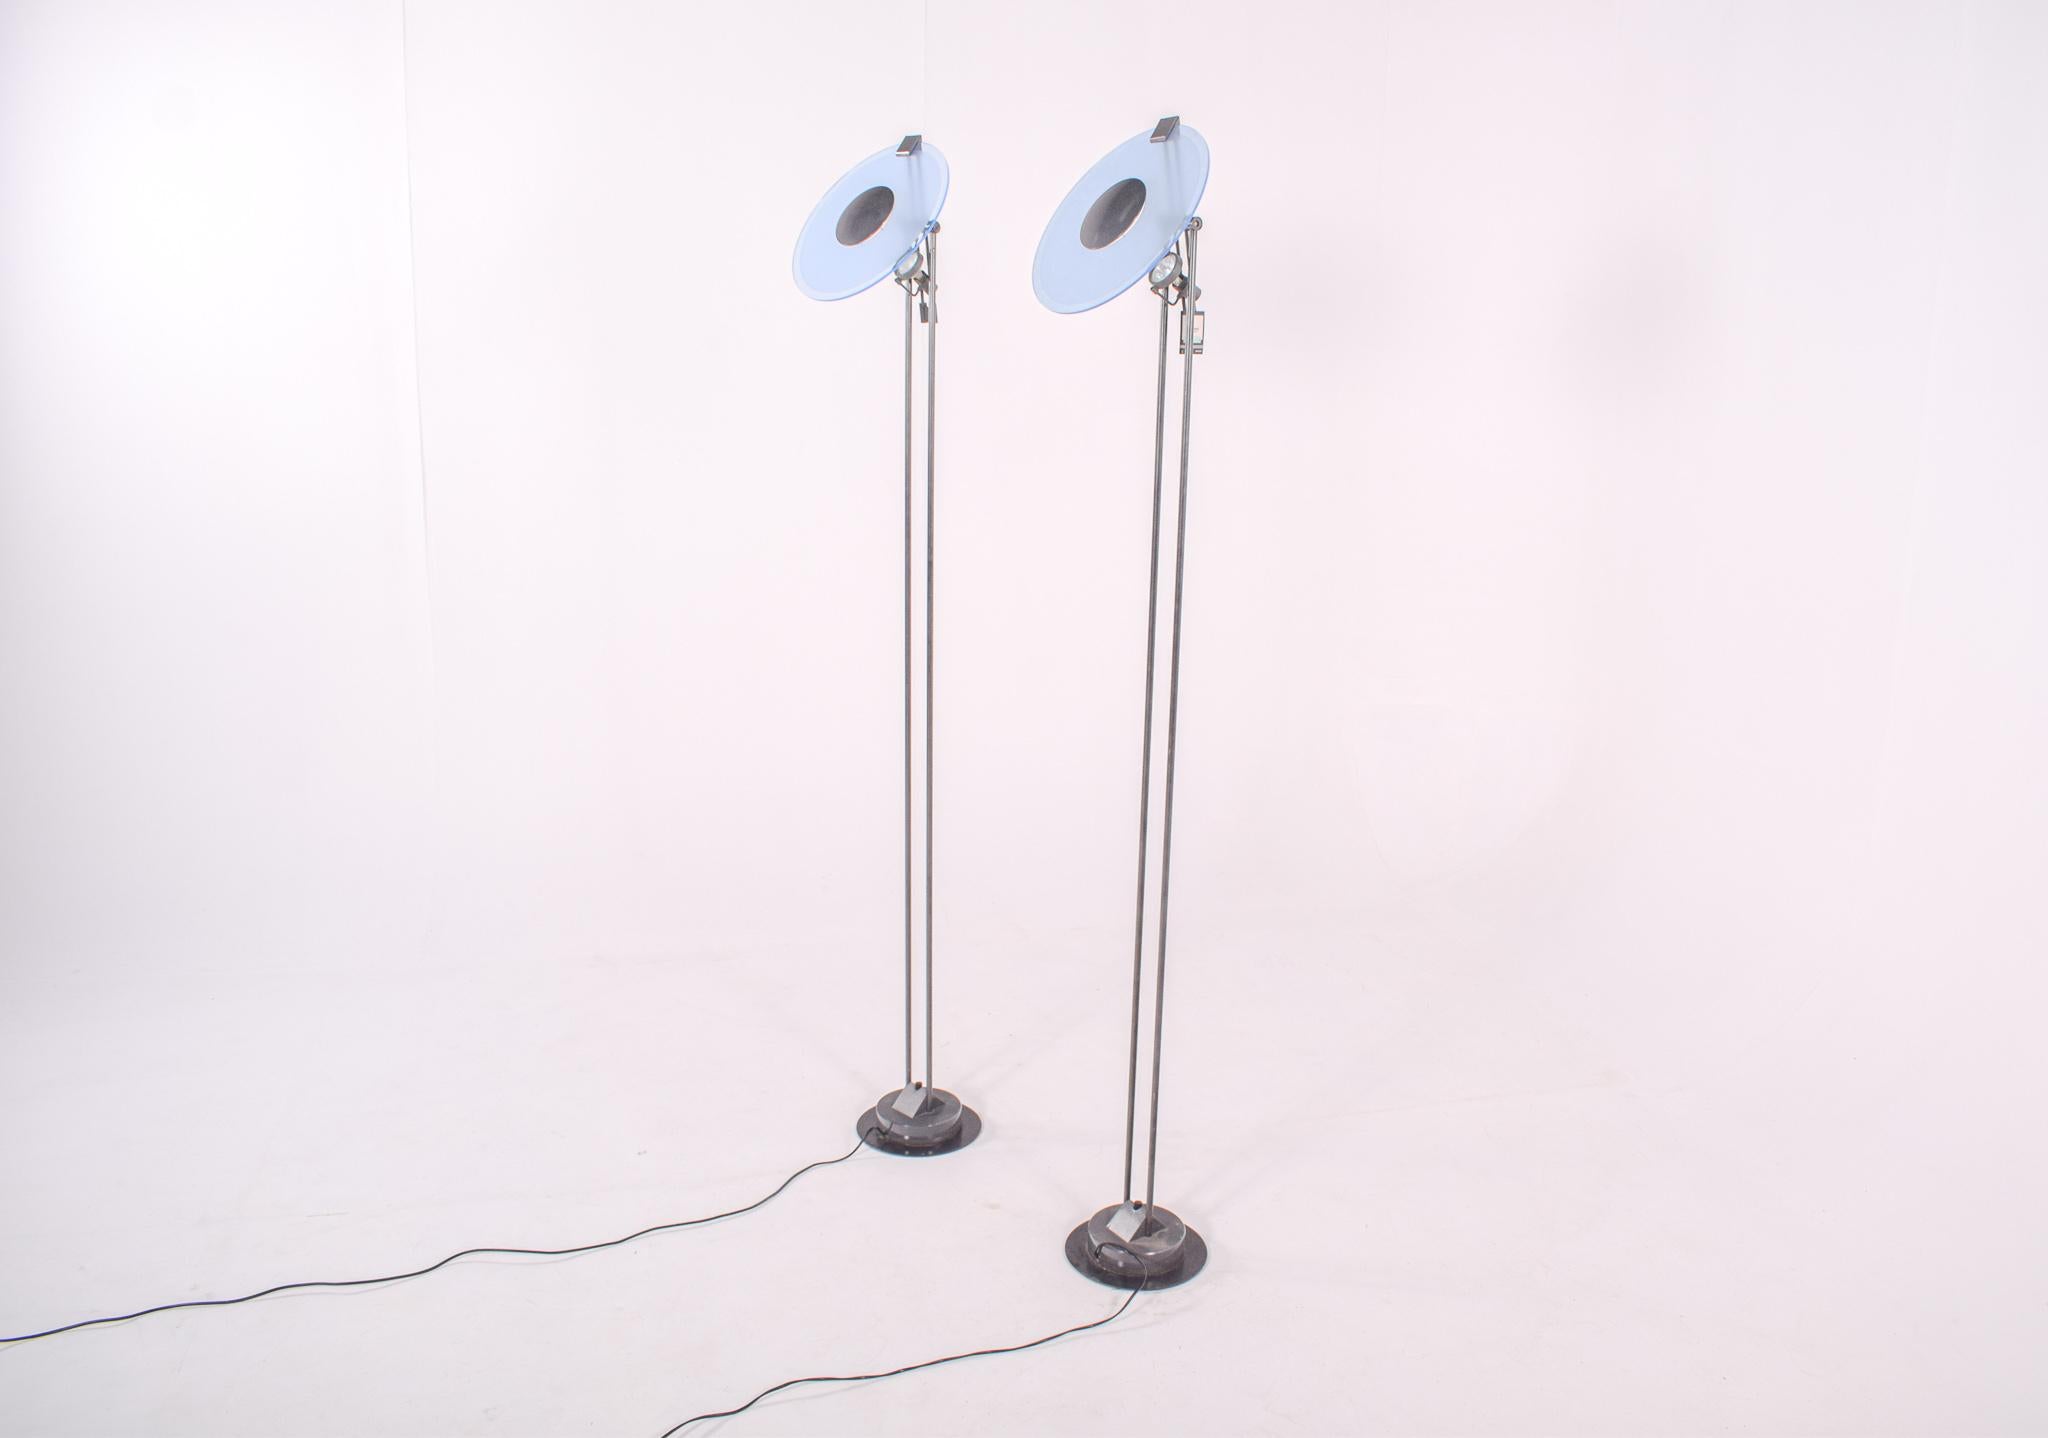 This pair of post-modern floor lamps from Philips' 